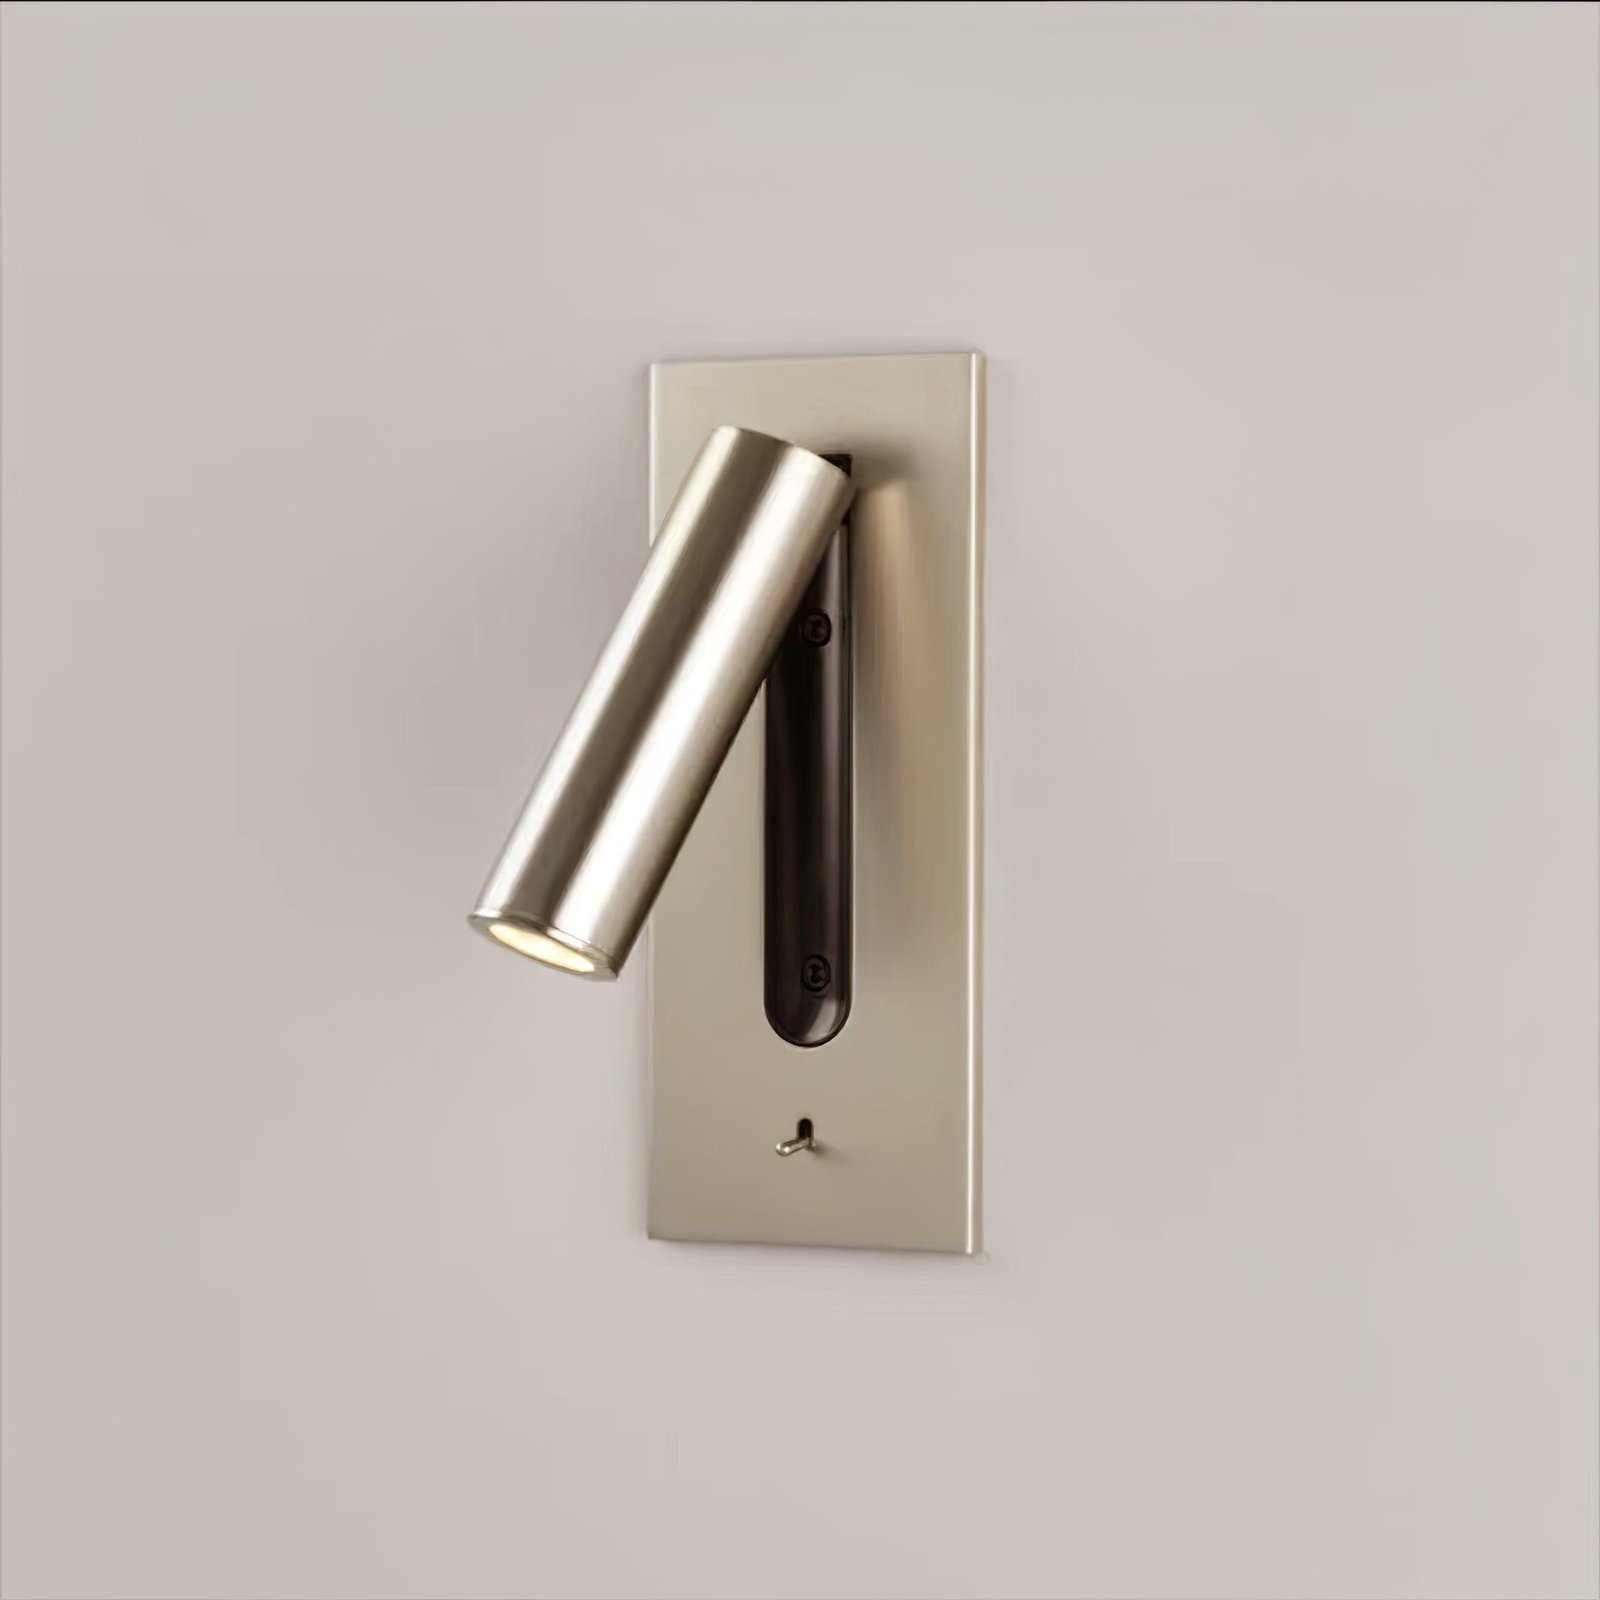 Nickel Fuse USB Sconces Set, Including 2 Pieces, with Dimensions of 7.8cm in Diameter and 18.3cm in Height